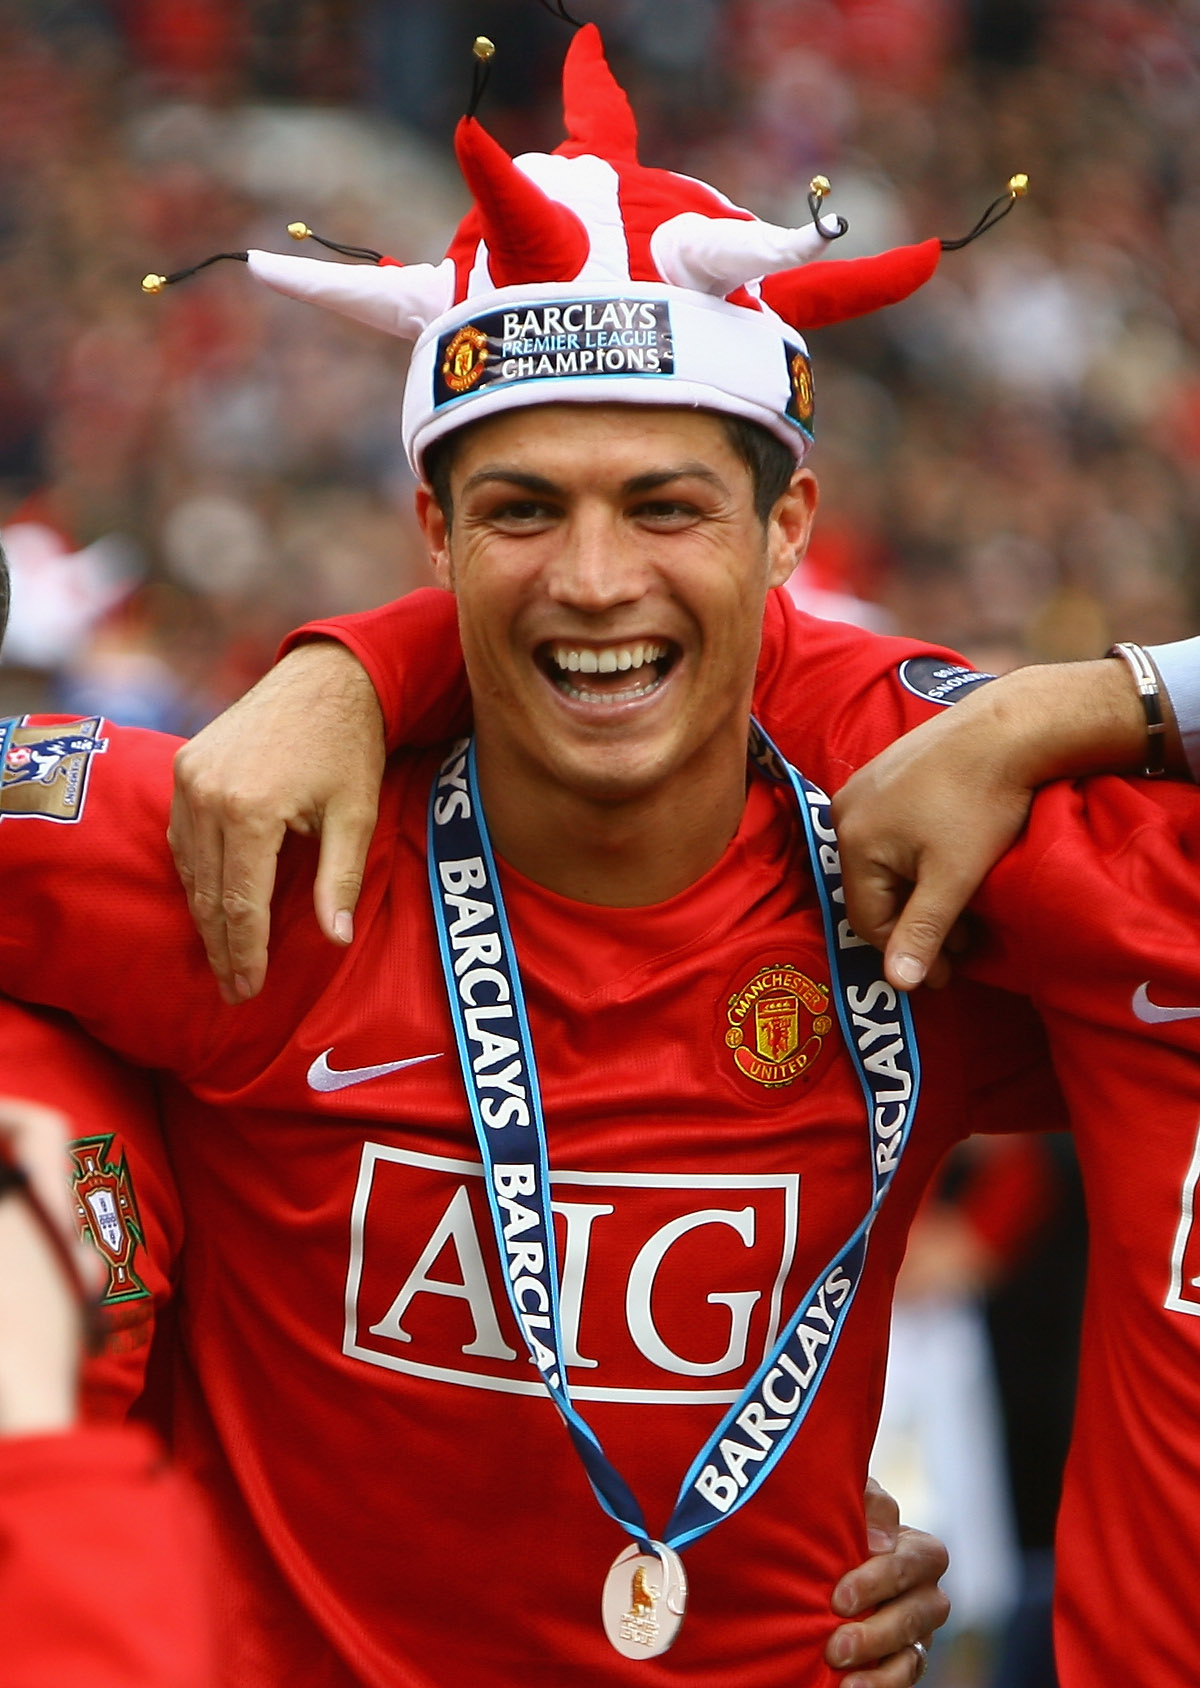 MANCHESTER, ENGLAND - MAY 16:  Cristiano Ronaldo of Manchester United celebrates winning the Barclays Premier League trophy after the Barclays Premier League match between Manchester United and Arsenal at Old Trafford on May 16, 2009 in Manchester, Englan